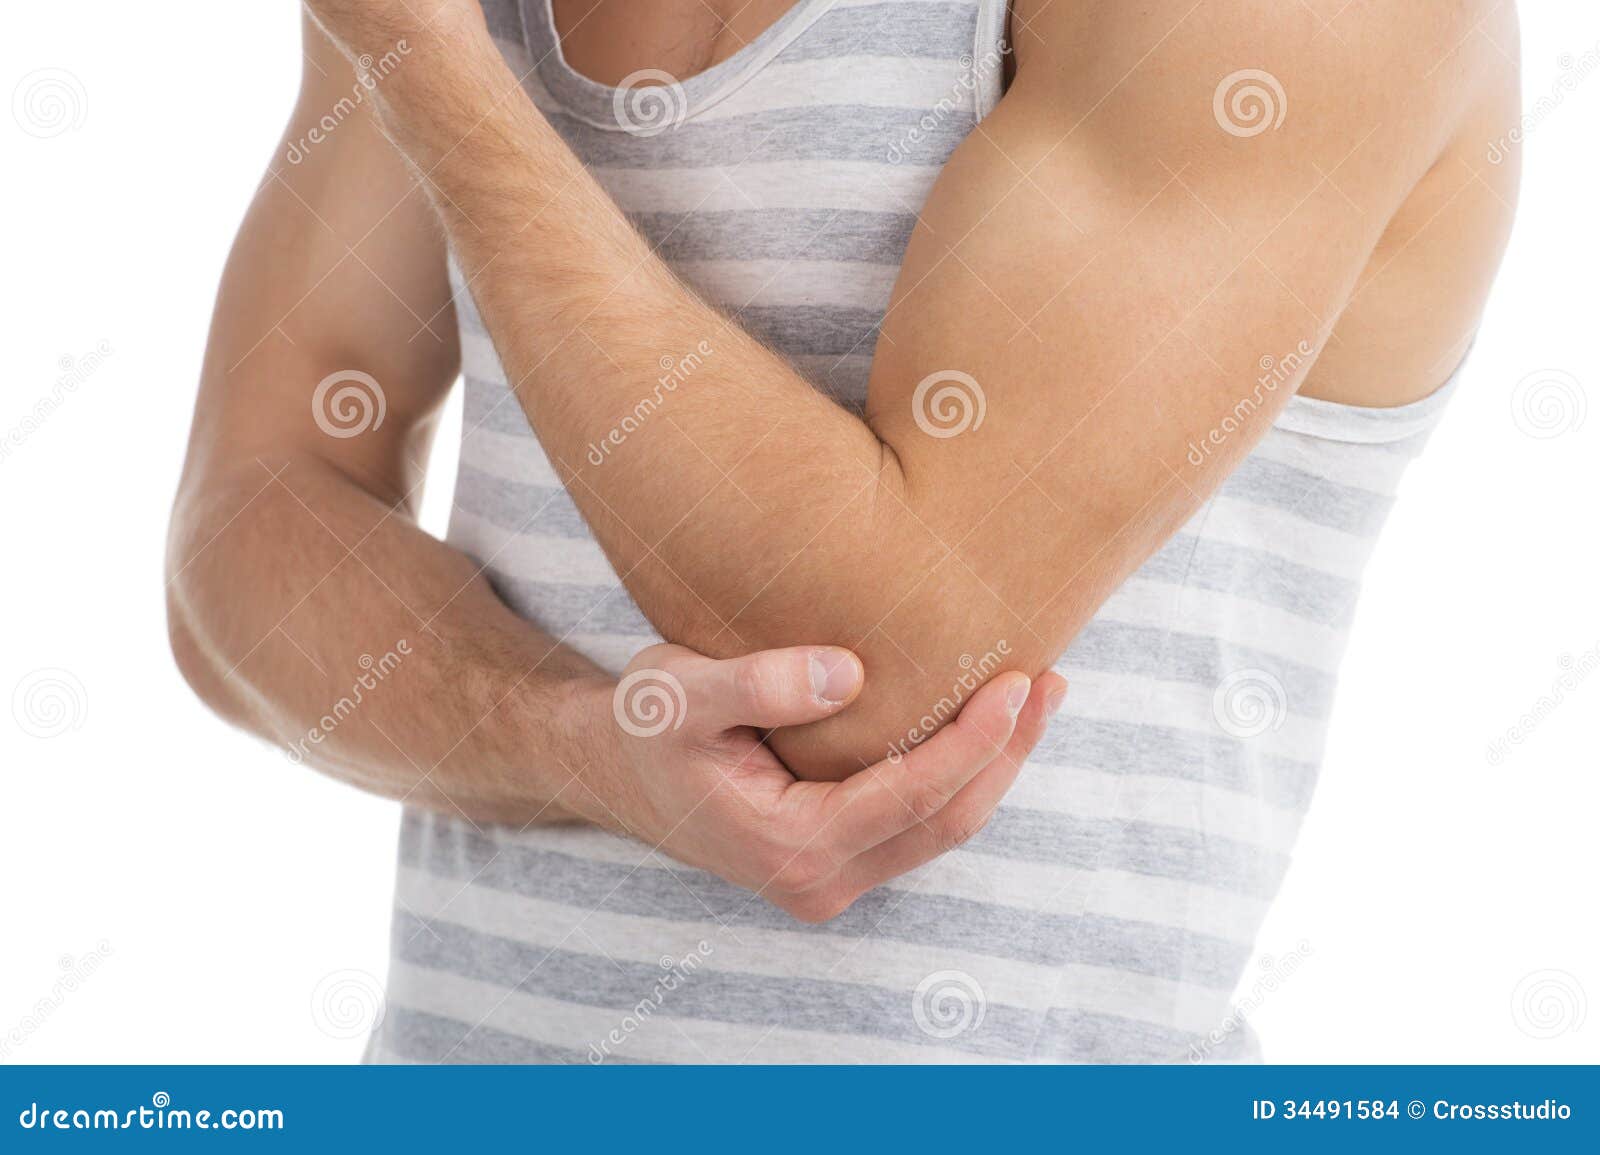 pain in an elbow.